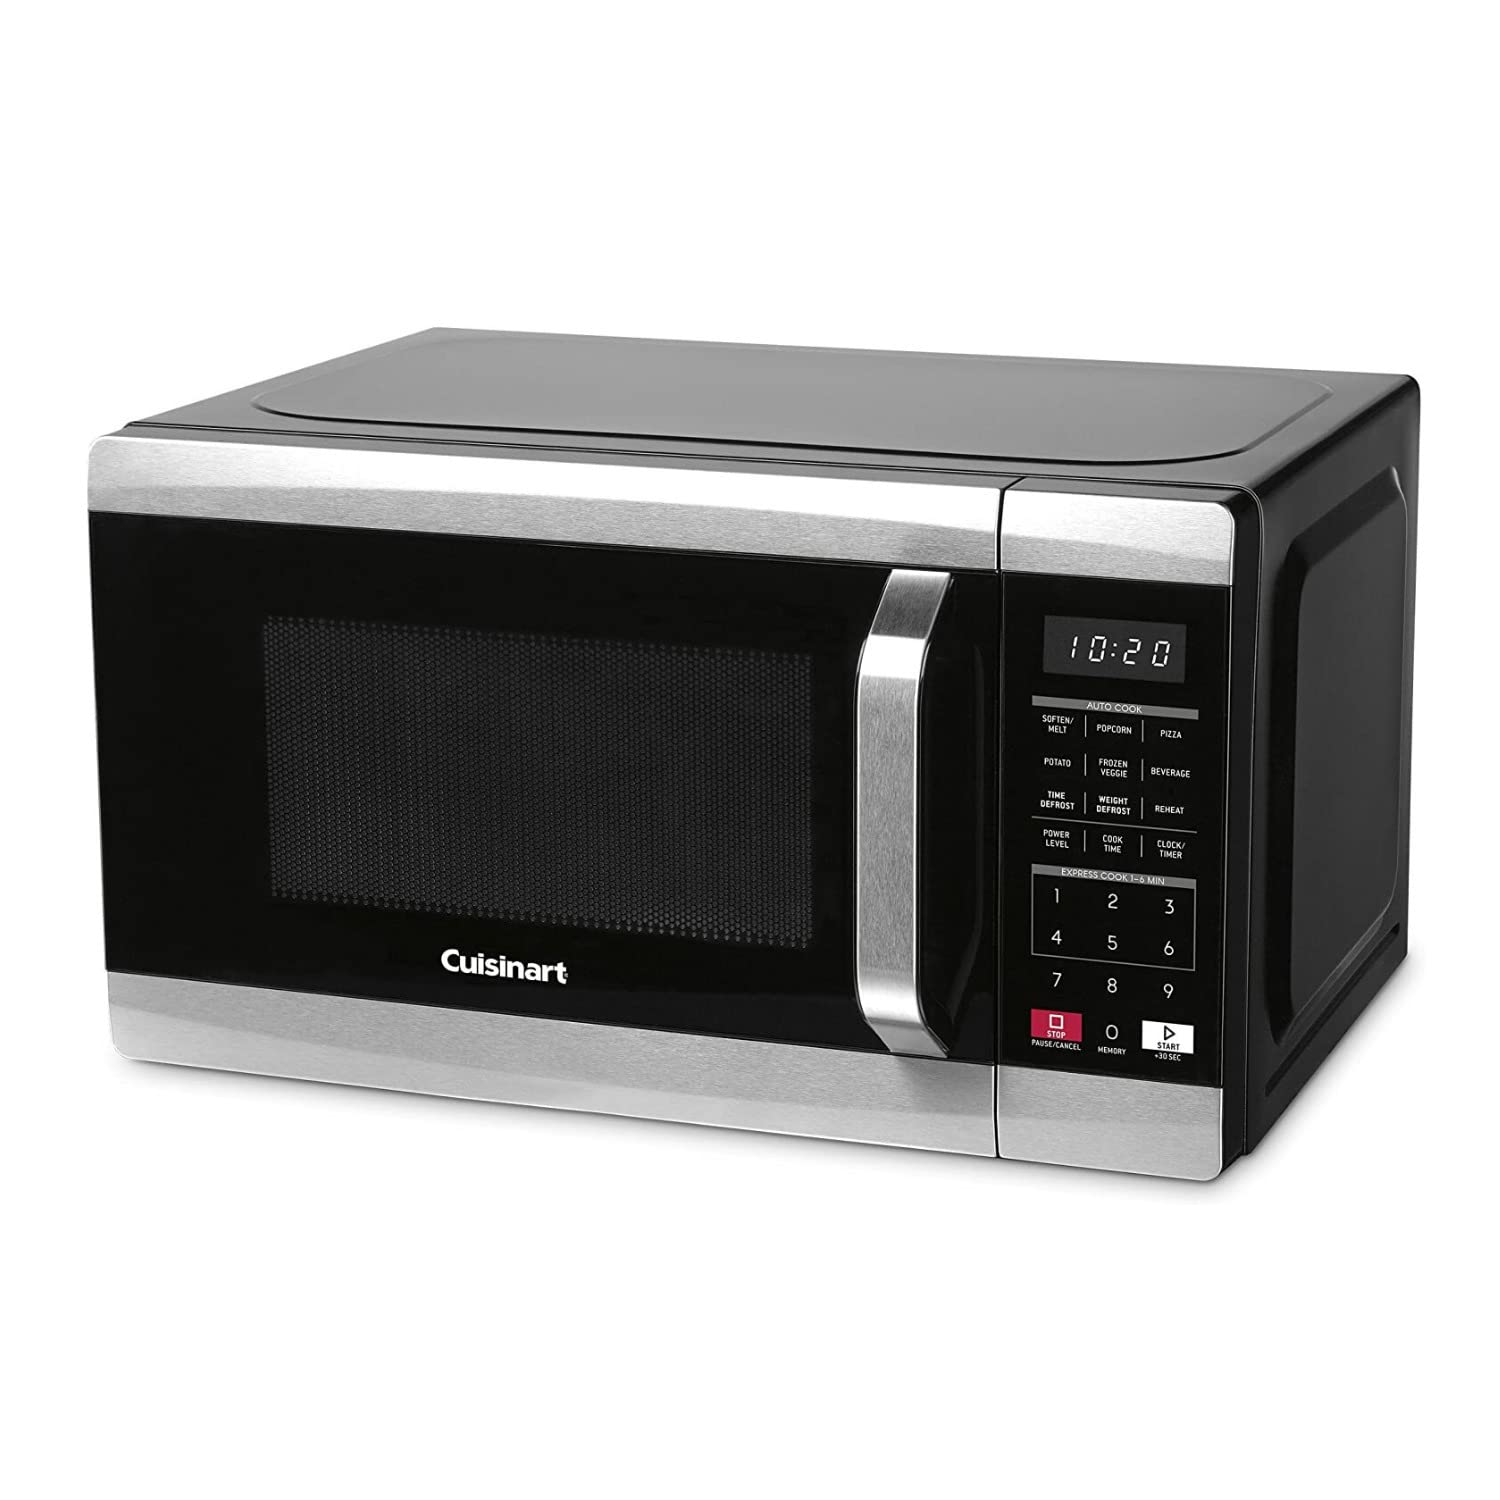 Cuisinart CMW-70 Stainless Steel Microwave Oven, Silver